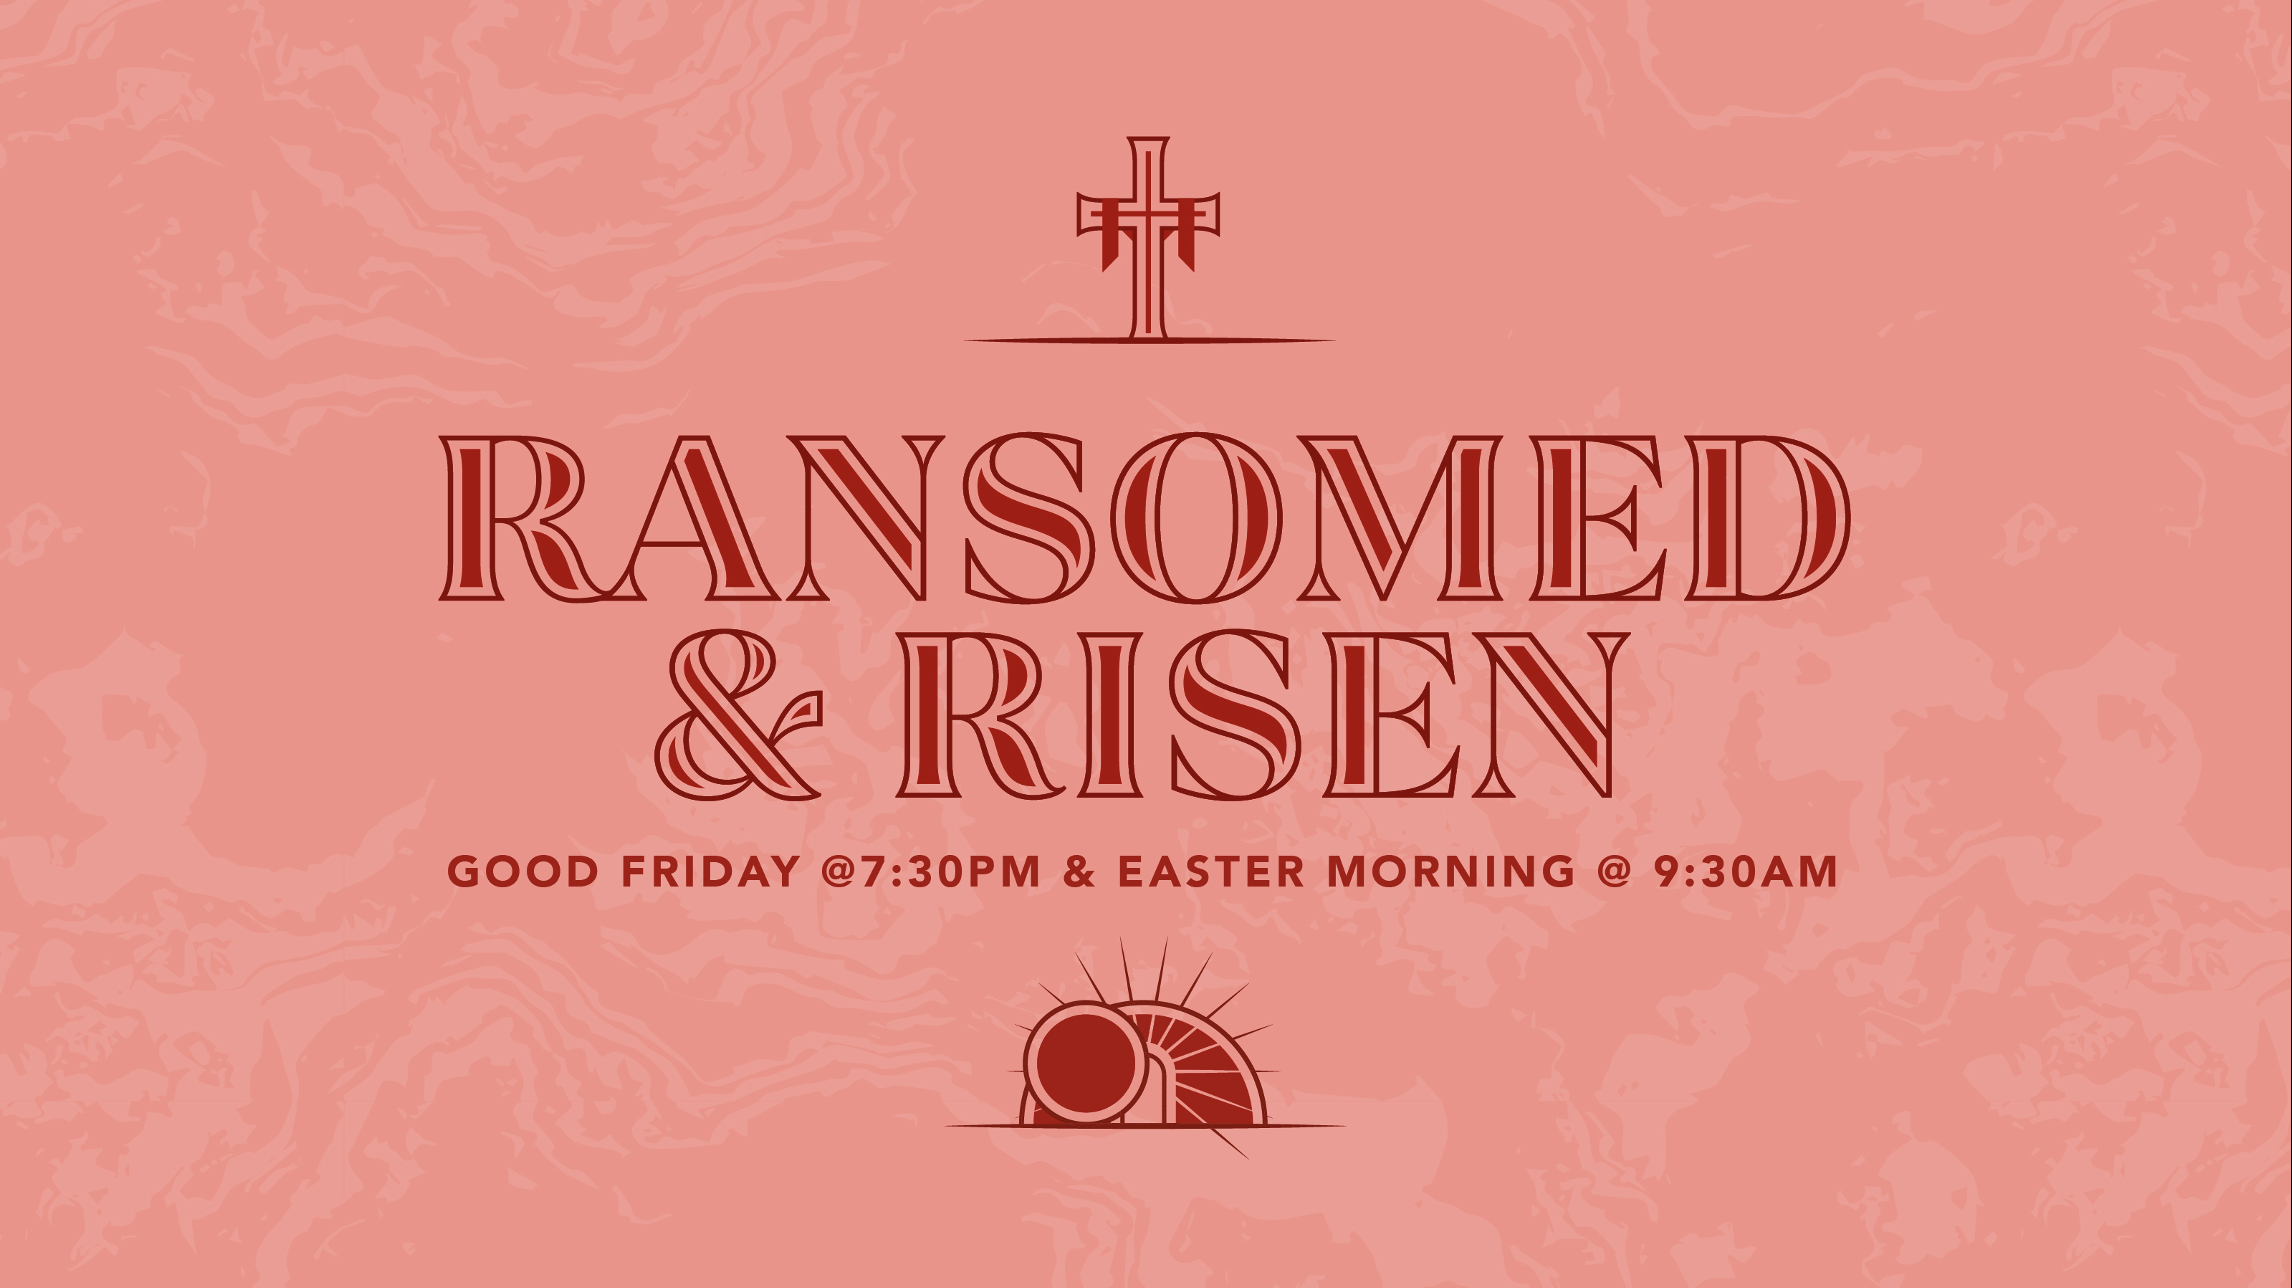 Join us on Good Friday and Easter, ’21